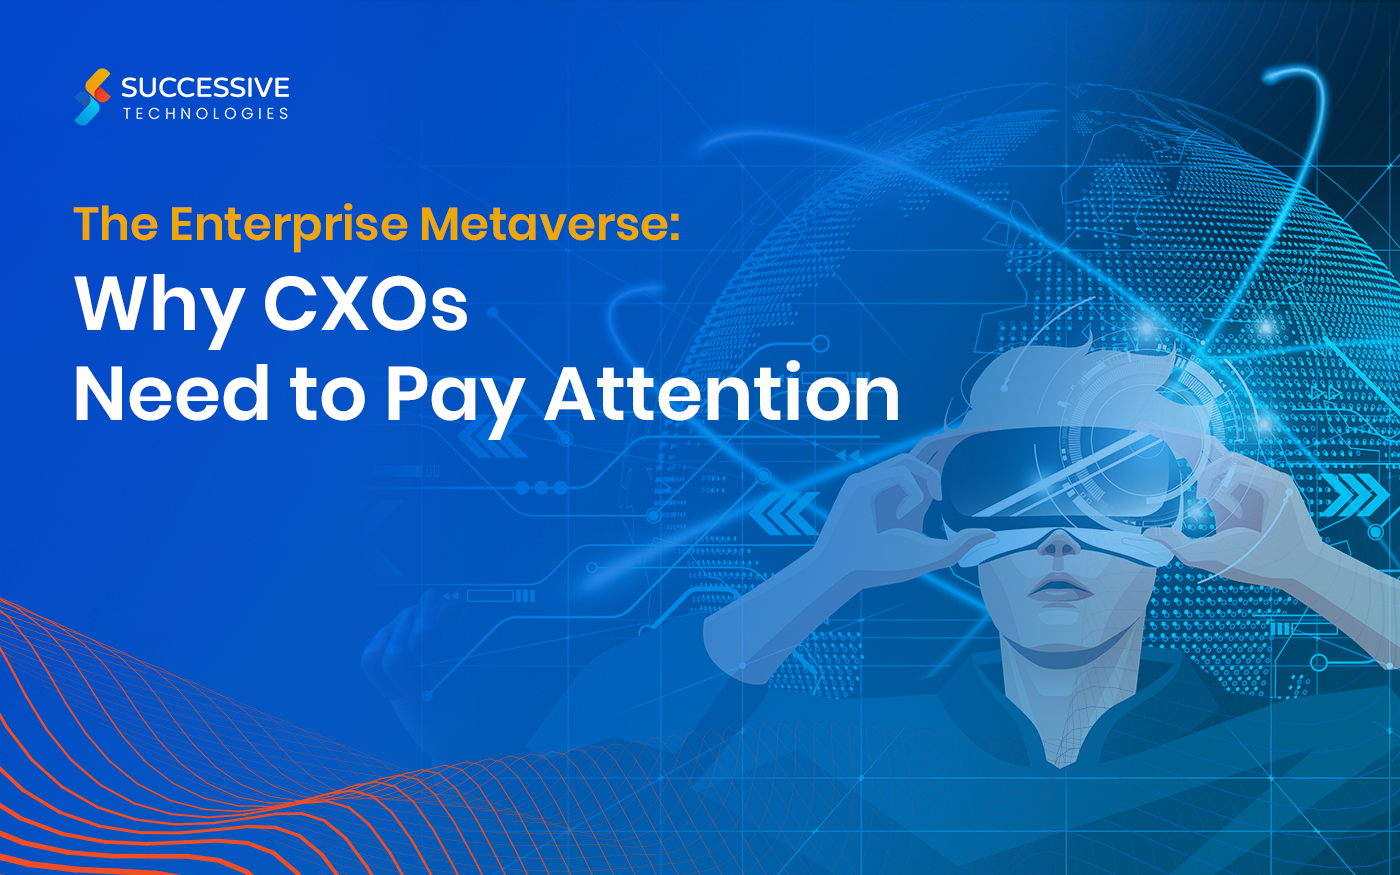 The Enterprise Metaverse: Why CXOs Need to Pay Attention